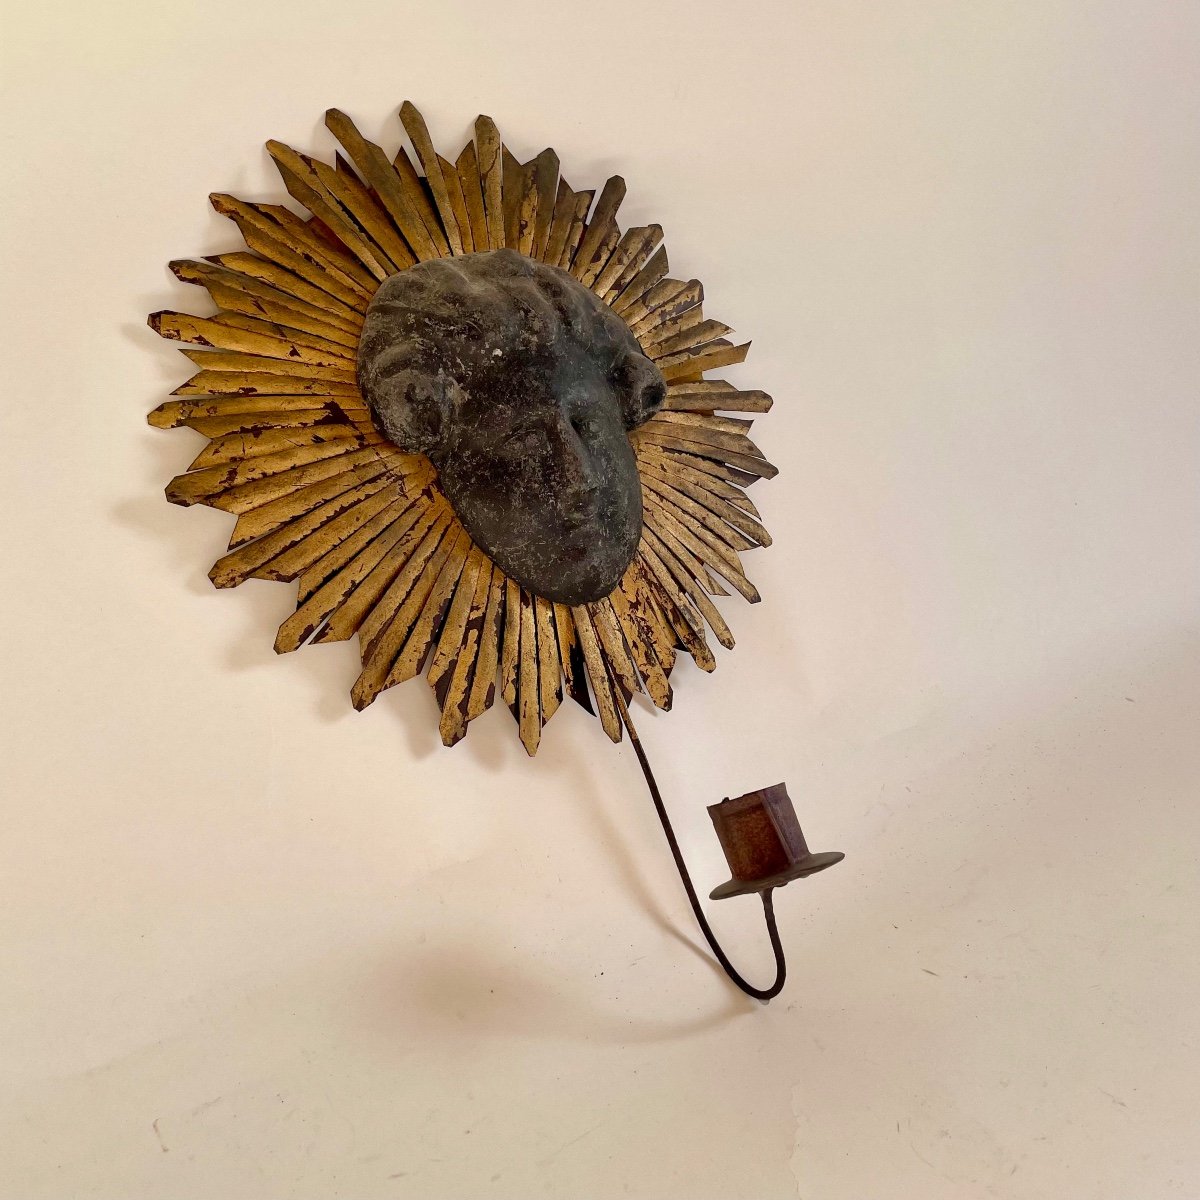 Wall Lamp In The Shape Of A Sun Golden Beaten Iron Style From The 18th Louis XIV Period Early 20th Century-photo-3